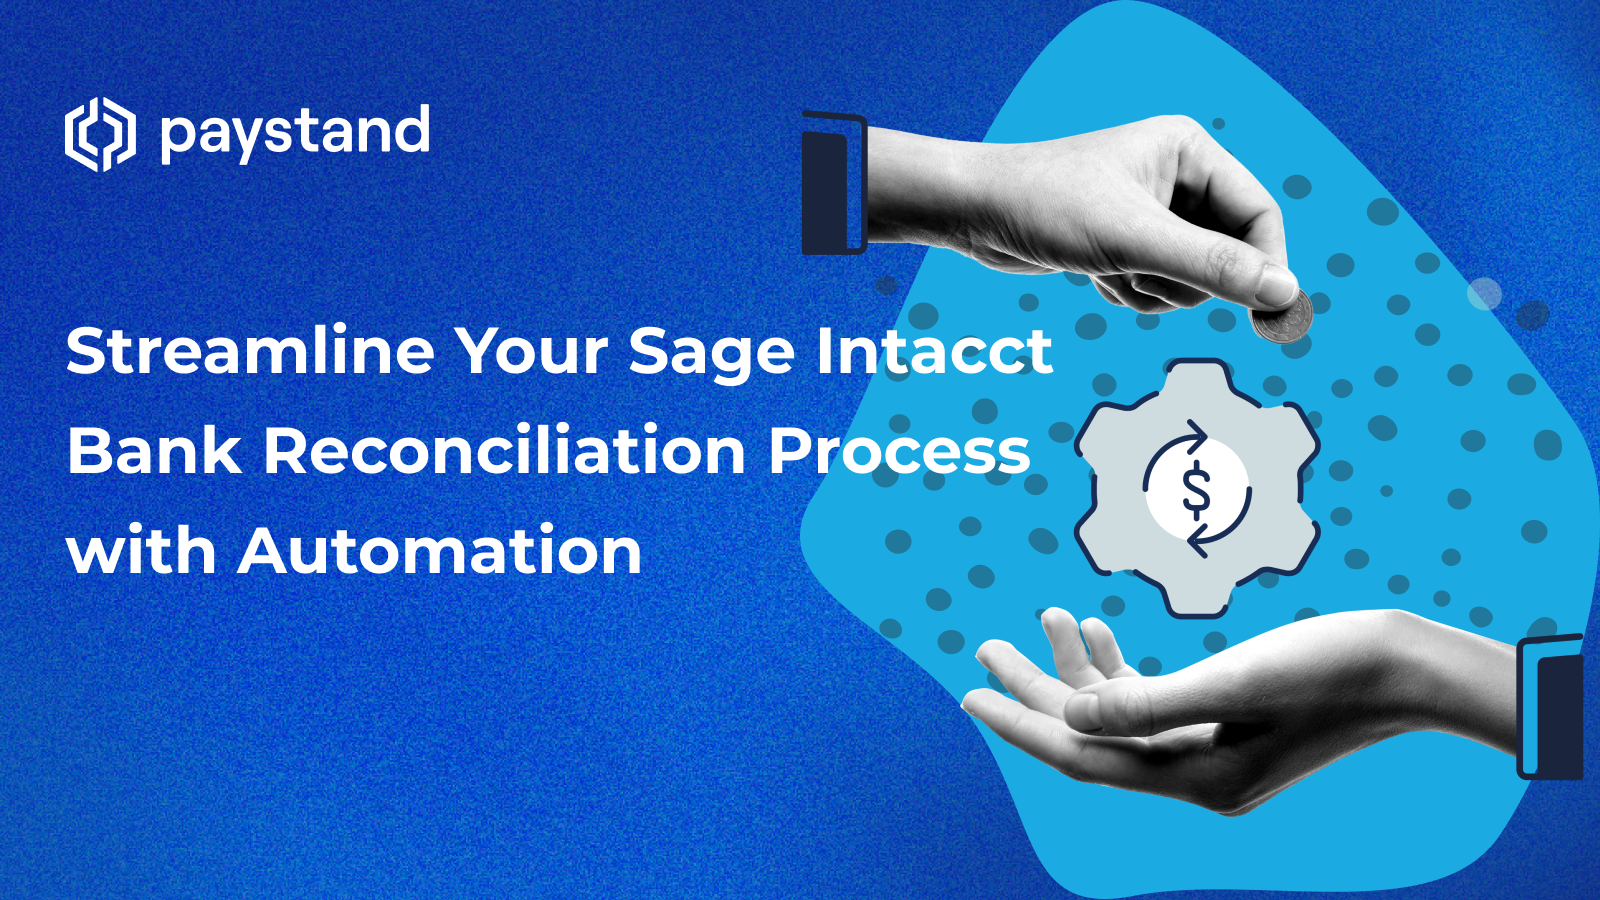 Streamline Your Sage Intacct Bank Reconciliation Process with Automation